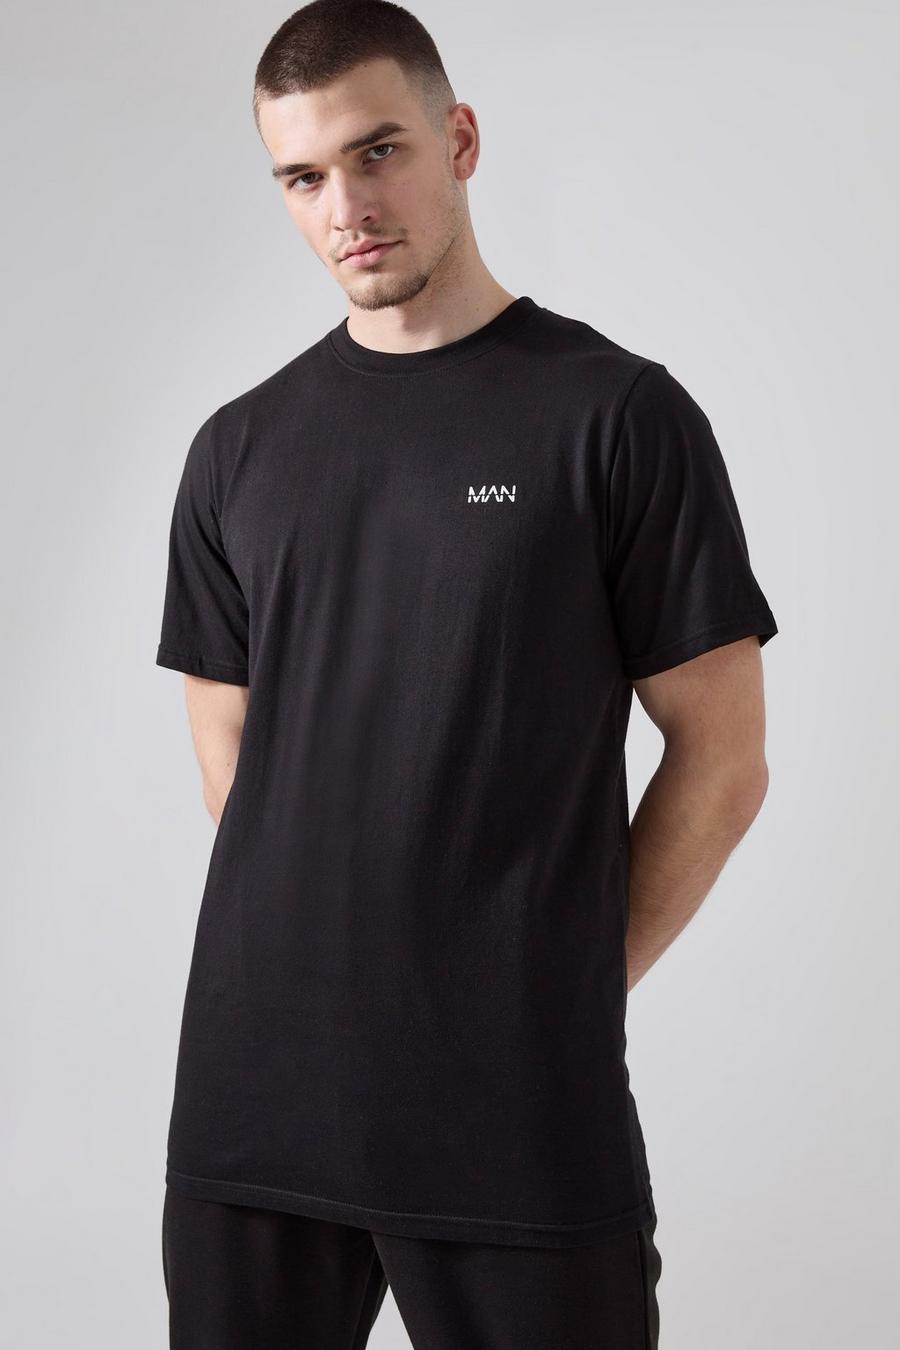 Black Tall Basic Man Active Fitness T-Shirt image number 1